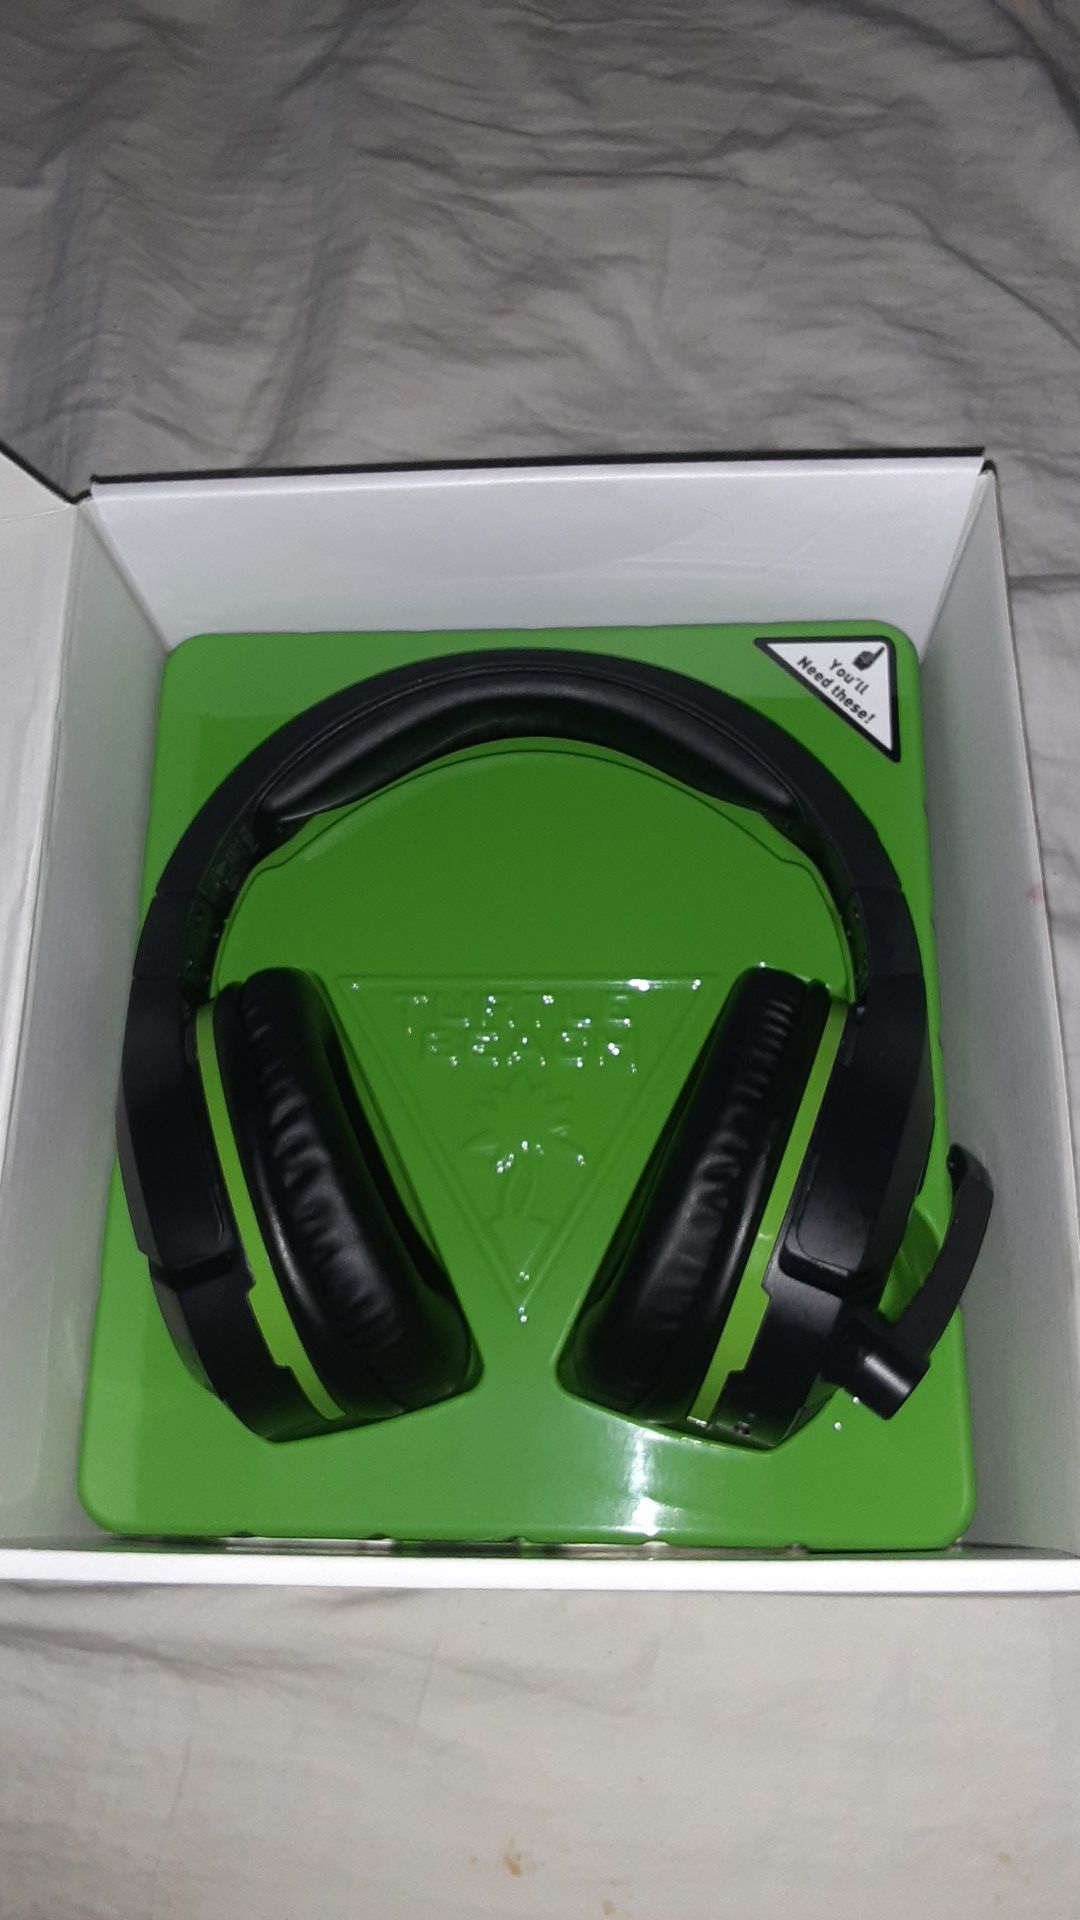 Turtle beach headset 700 comes with charger works perfect